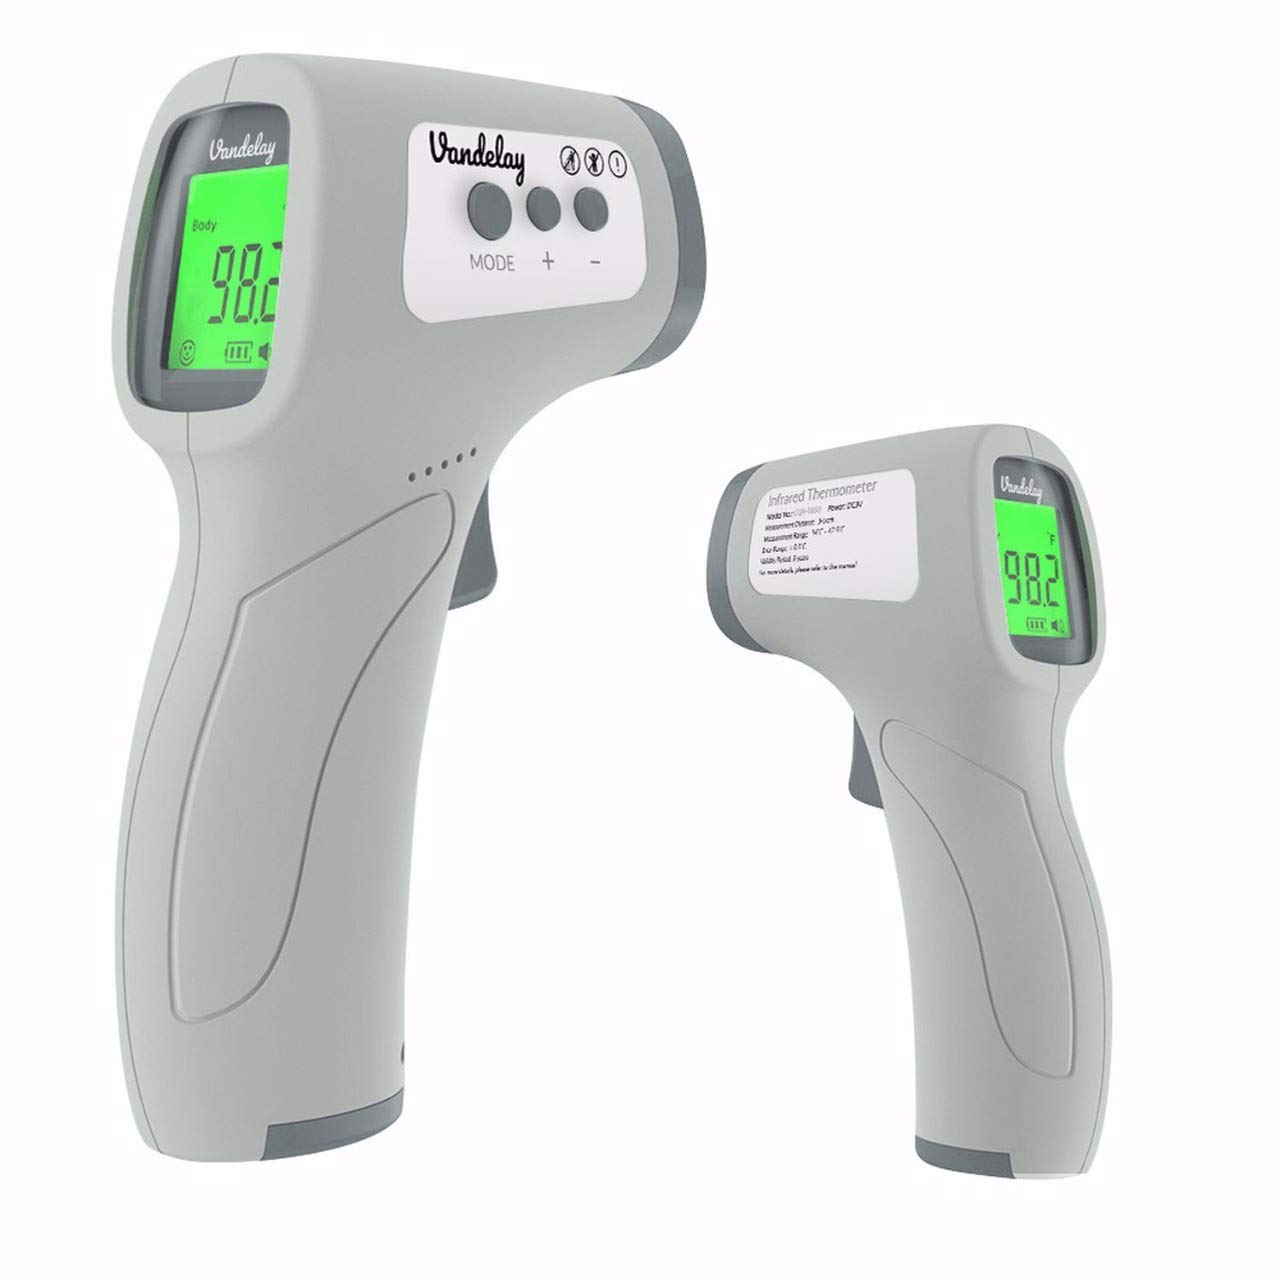 Vandelay Infrared Thermometer - 3 years Sensor Warranty - MADE in INDIA -  Non Contact IR Thermometer, Forehead Temperature Gun - Hungamastart